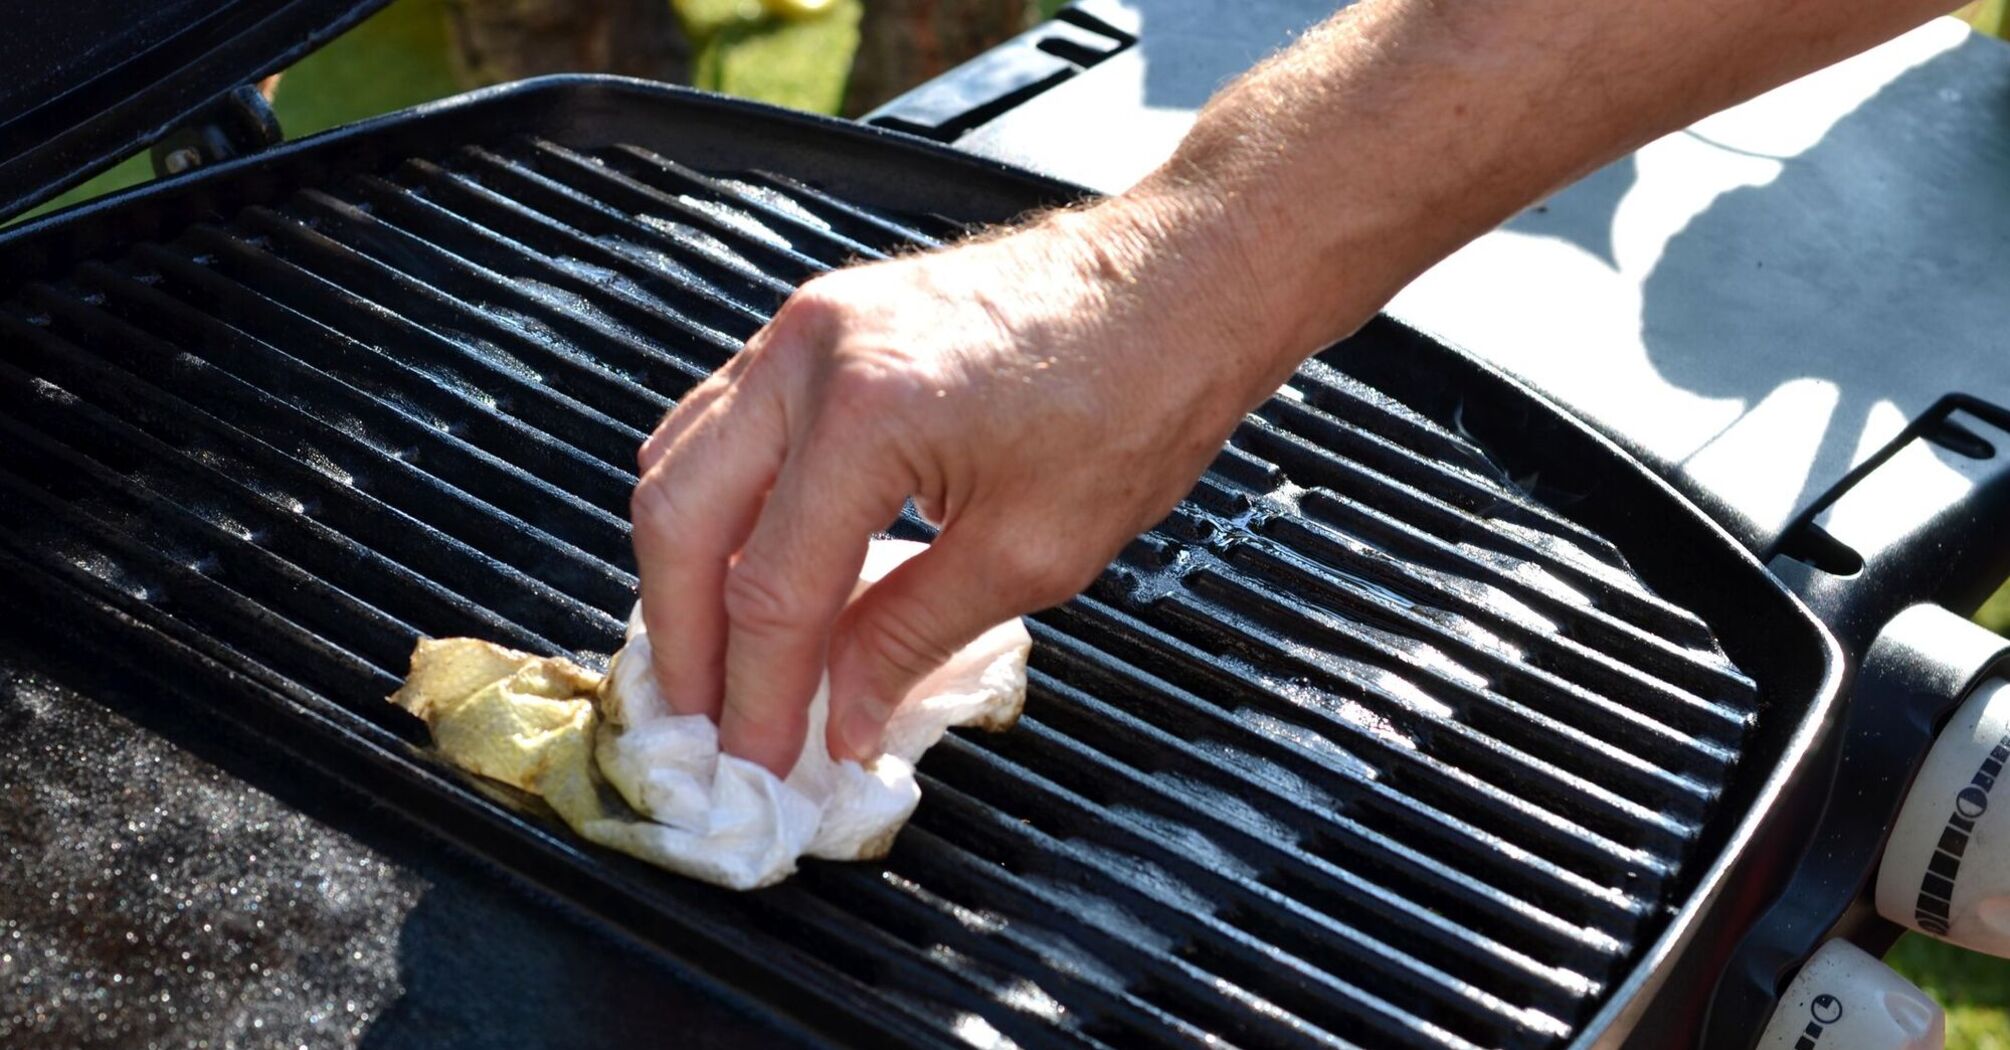 How to clean a gas or charcoal grill